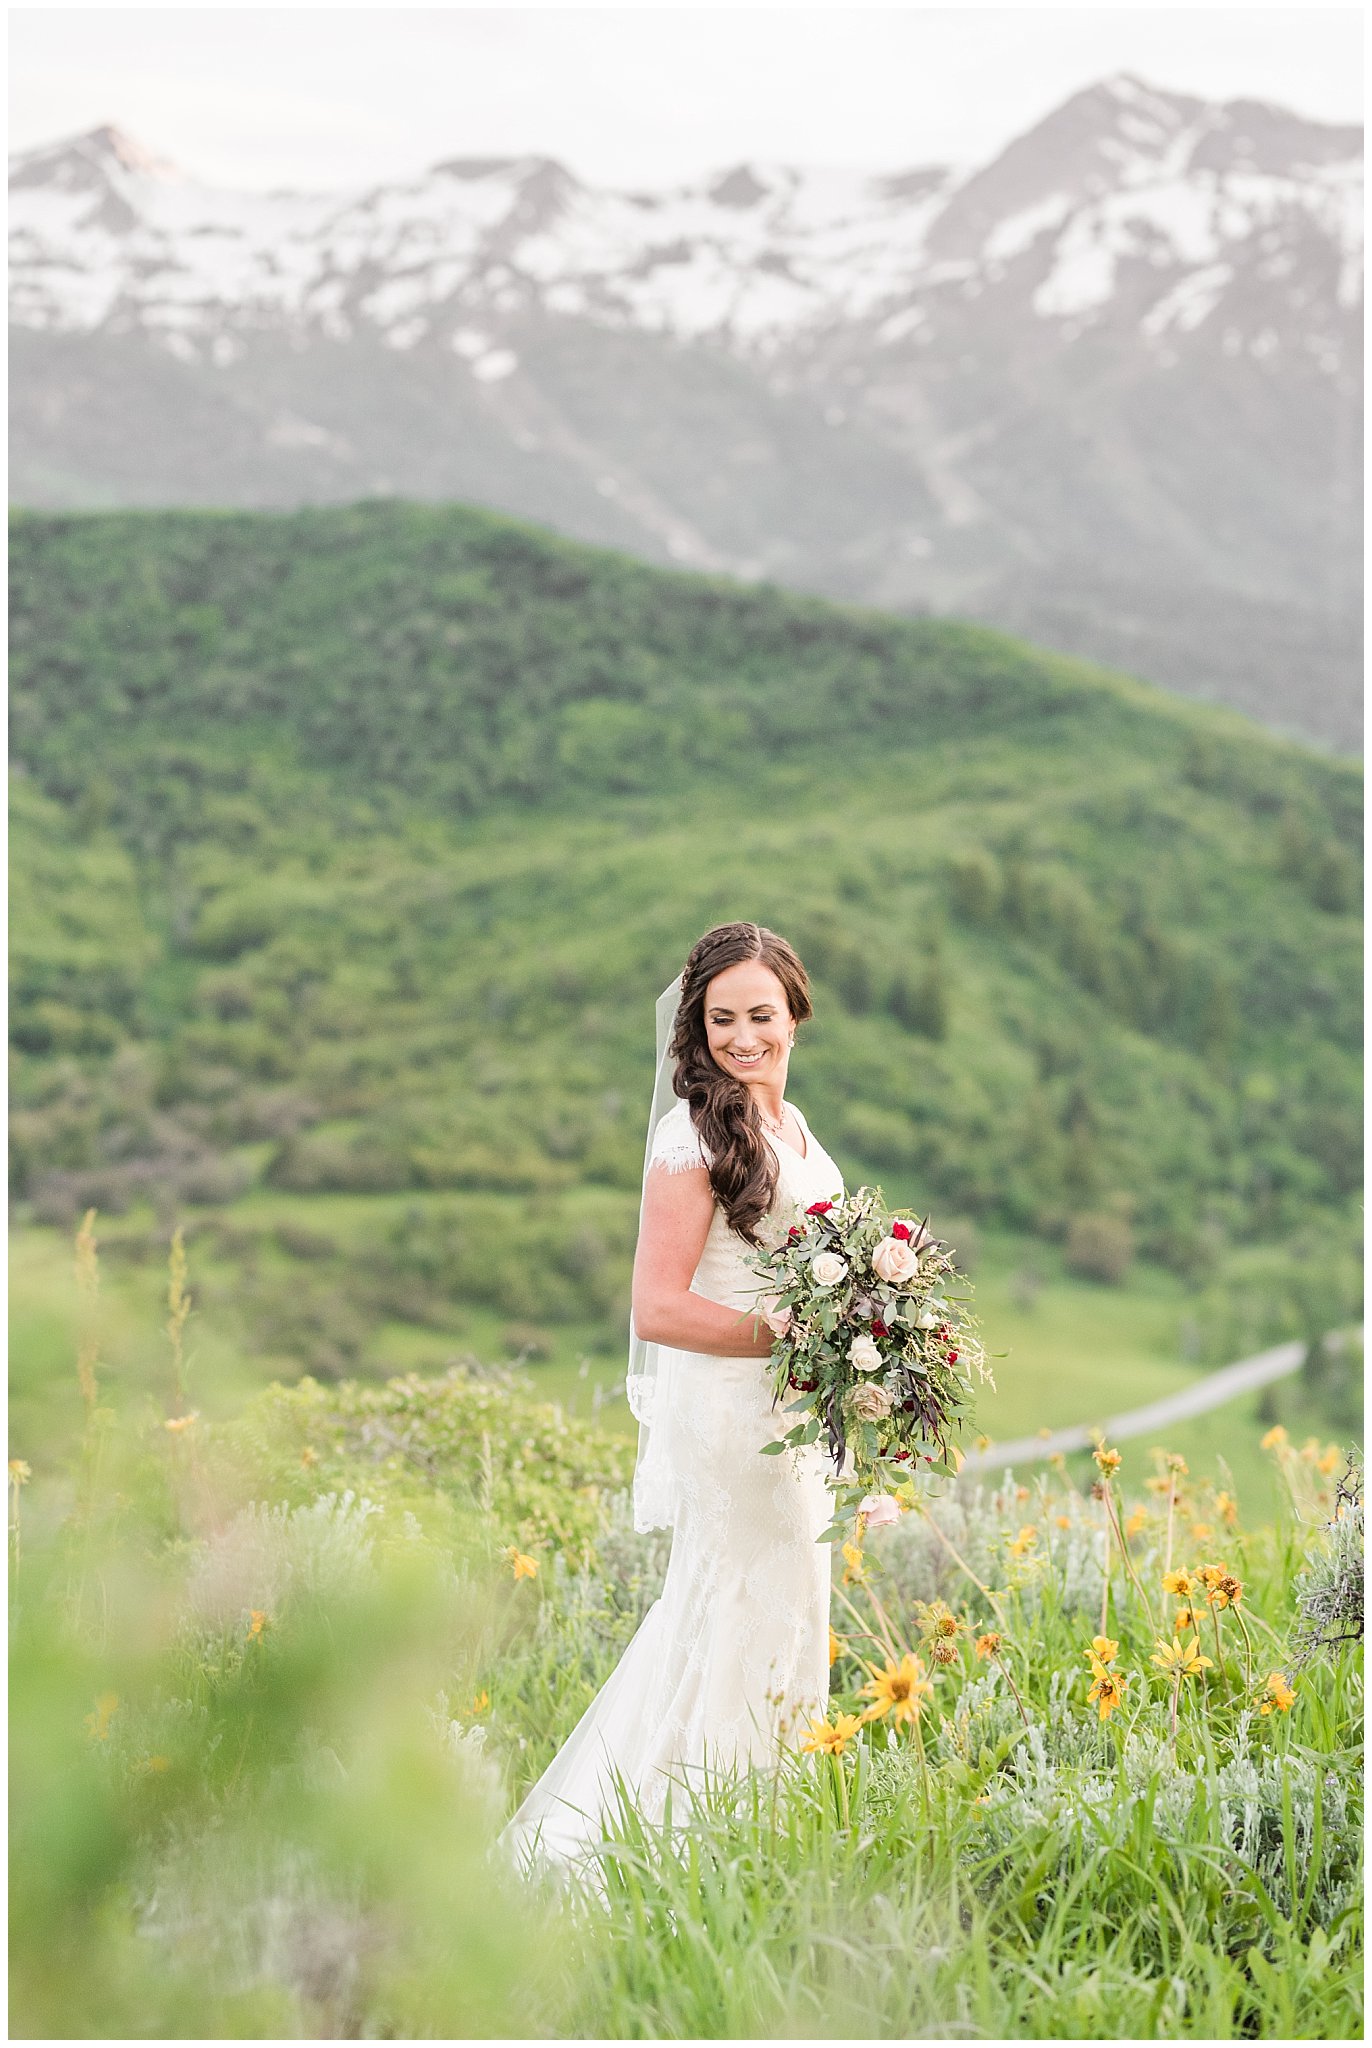 Bridal portraits in the mountains | Groom in grey suit and bride in beige and white dress with waterfall bouquet | Snowbasin Summer Formal Session | Utah Wedding Photographers | Jessie and Dallin